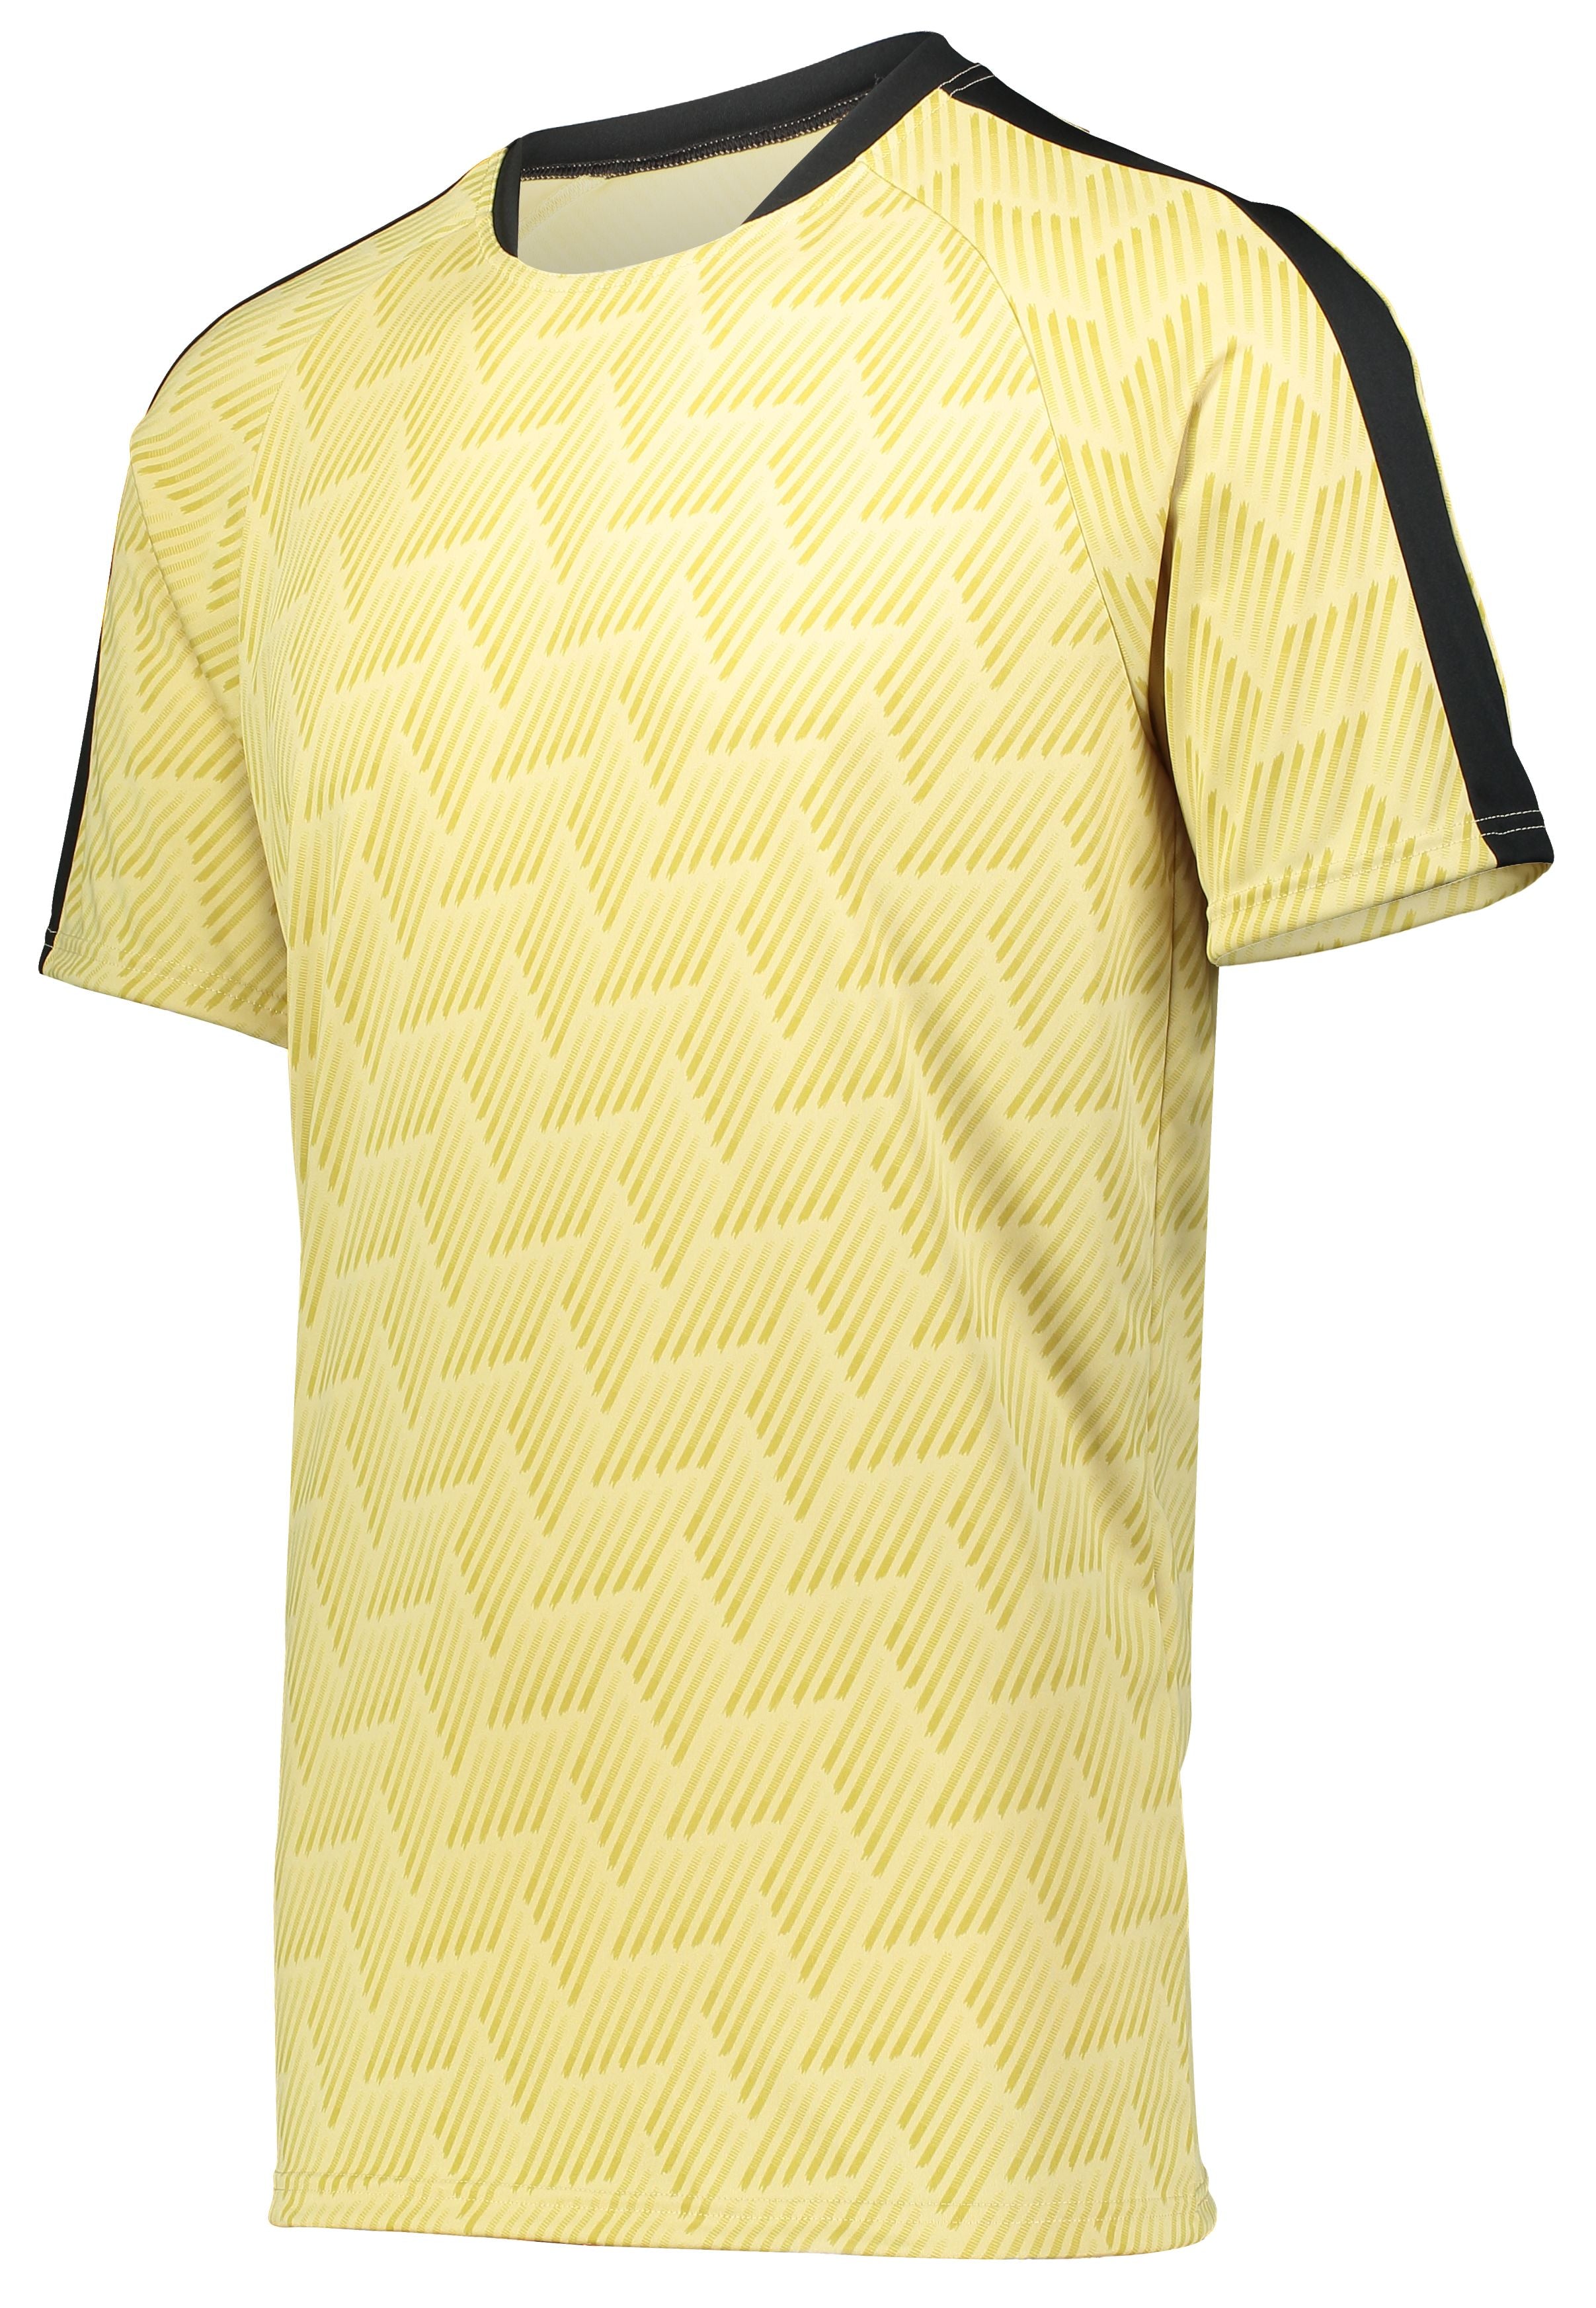 High 5 Youth Hypervolt Jersey in Vegas Gold Print/Black  -Part of the Youth, Youth-Jersey, High5-Products, Soccer, Shirts, All-Sports-1 product lines at KanaleyCreations.com